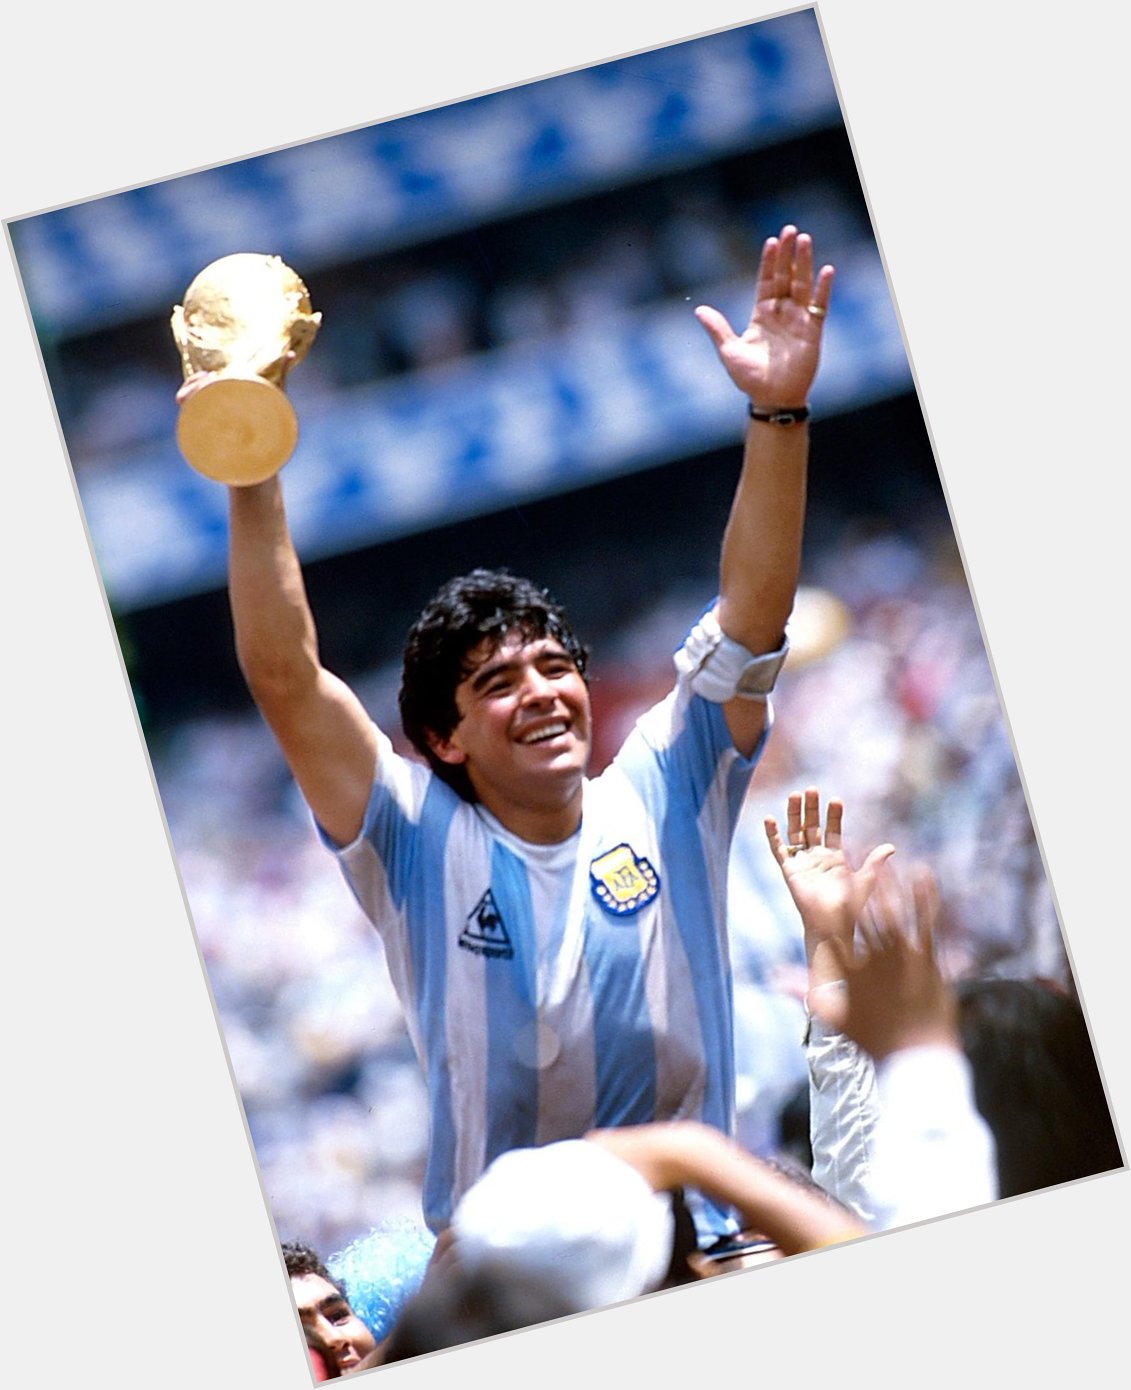 He would have been 61 today 

Posthumous Happy Birthday to Diego Maradona  